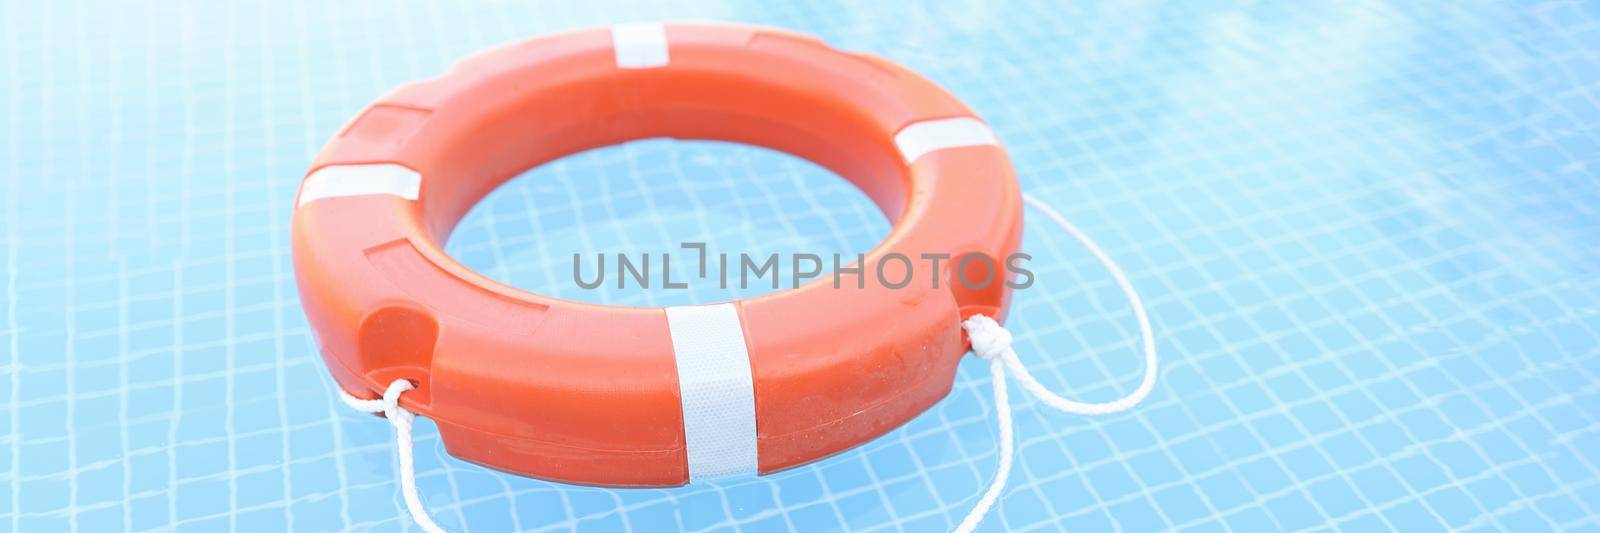 Orange plastic lifebuoy floating in pool closeup. Safety on water concept